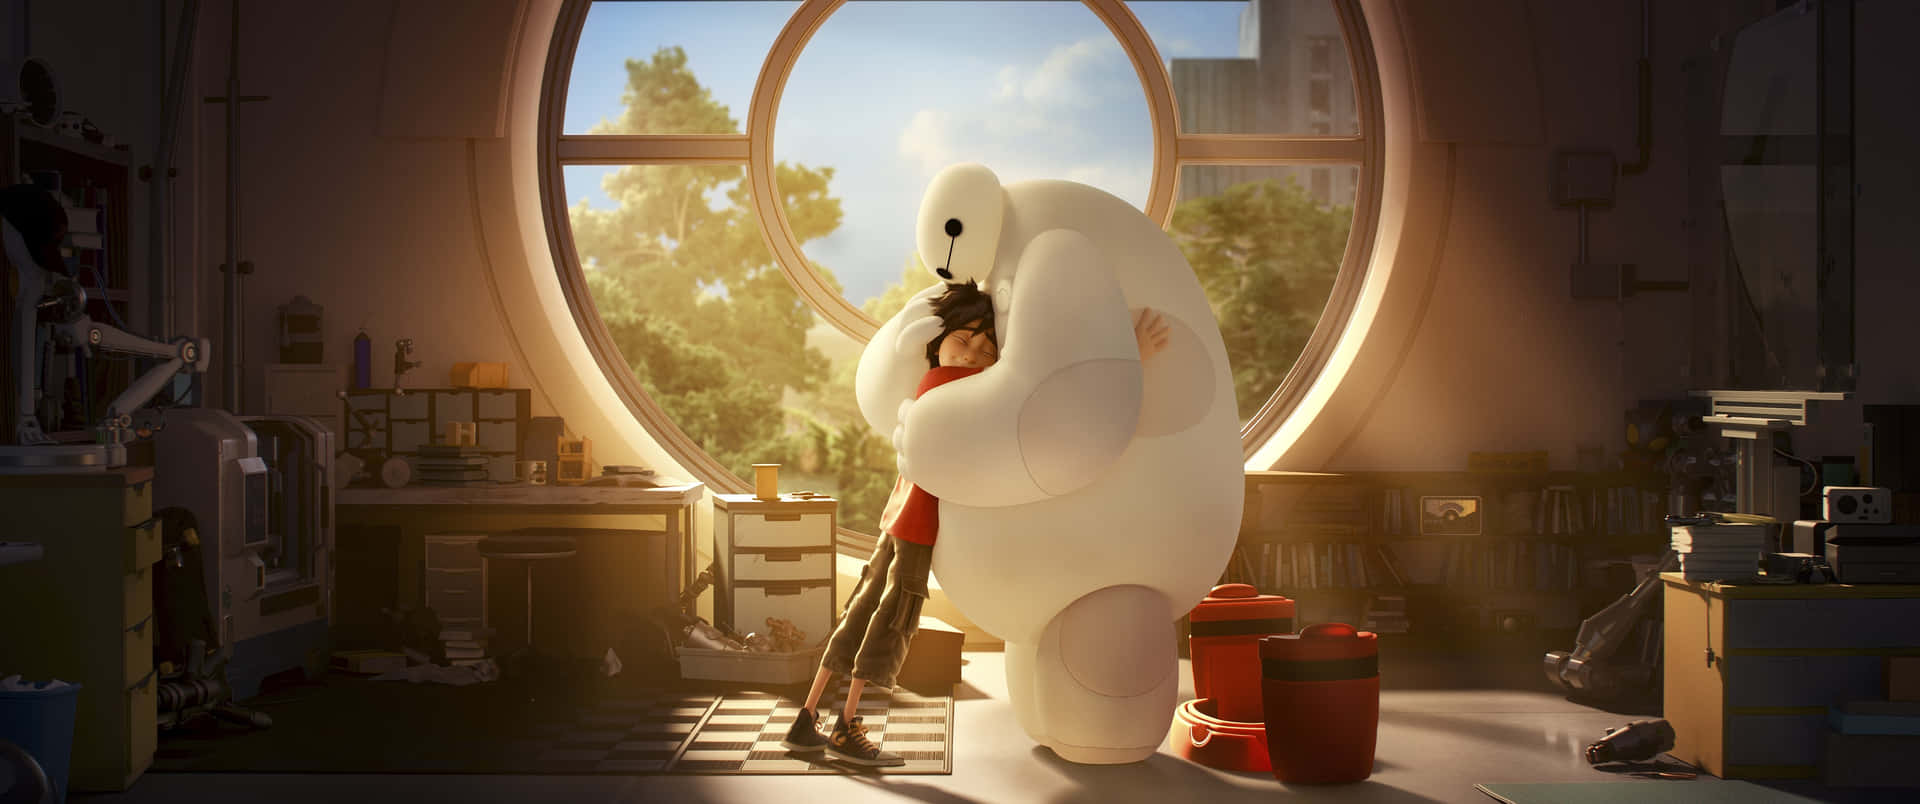 Explore a Technological Wonderland with Big Hero 6